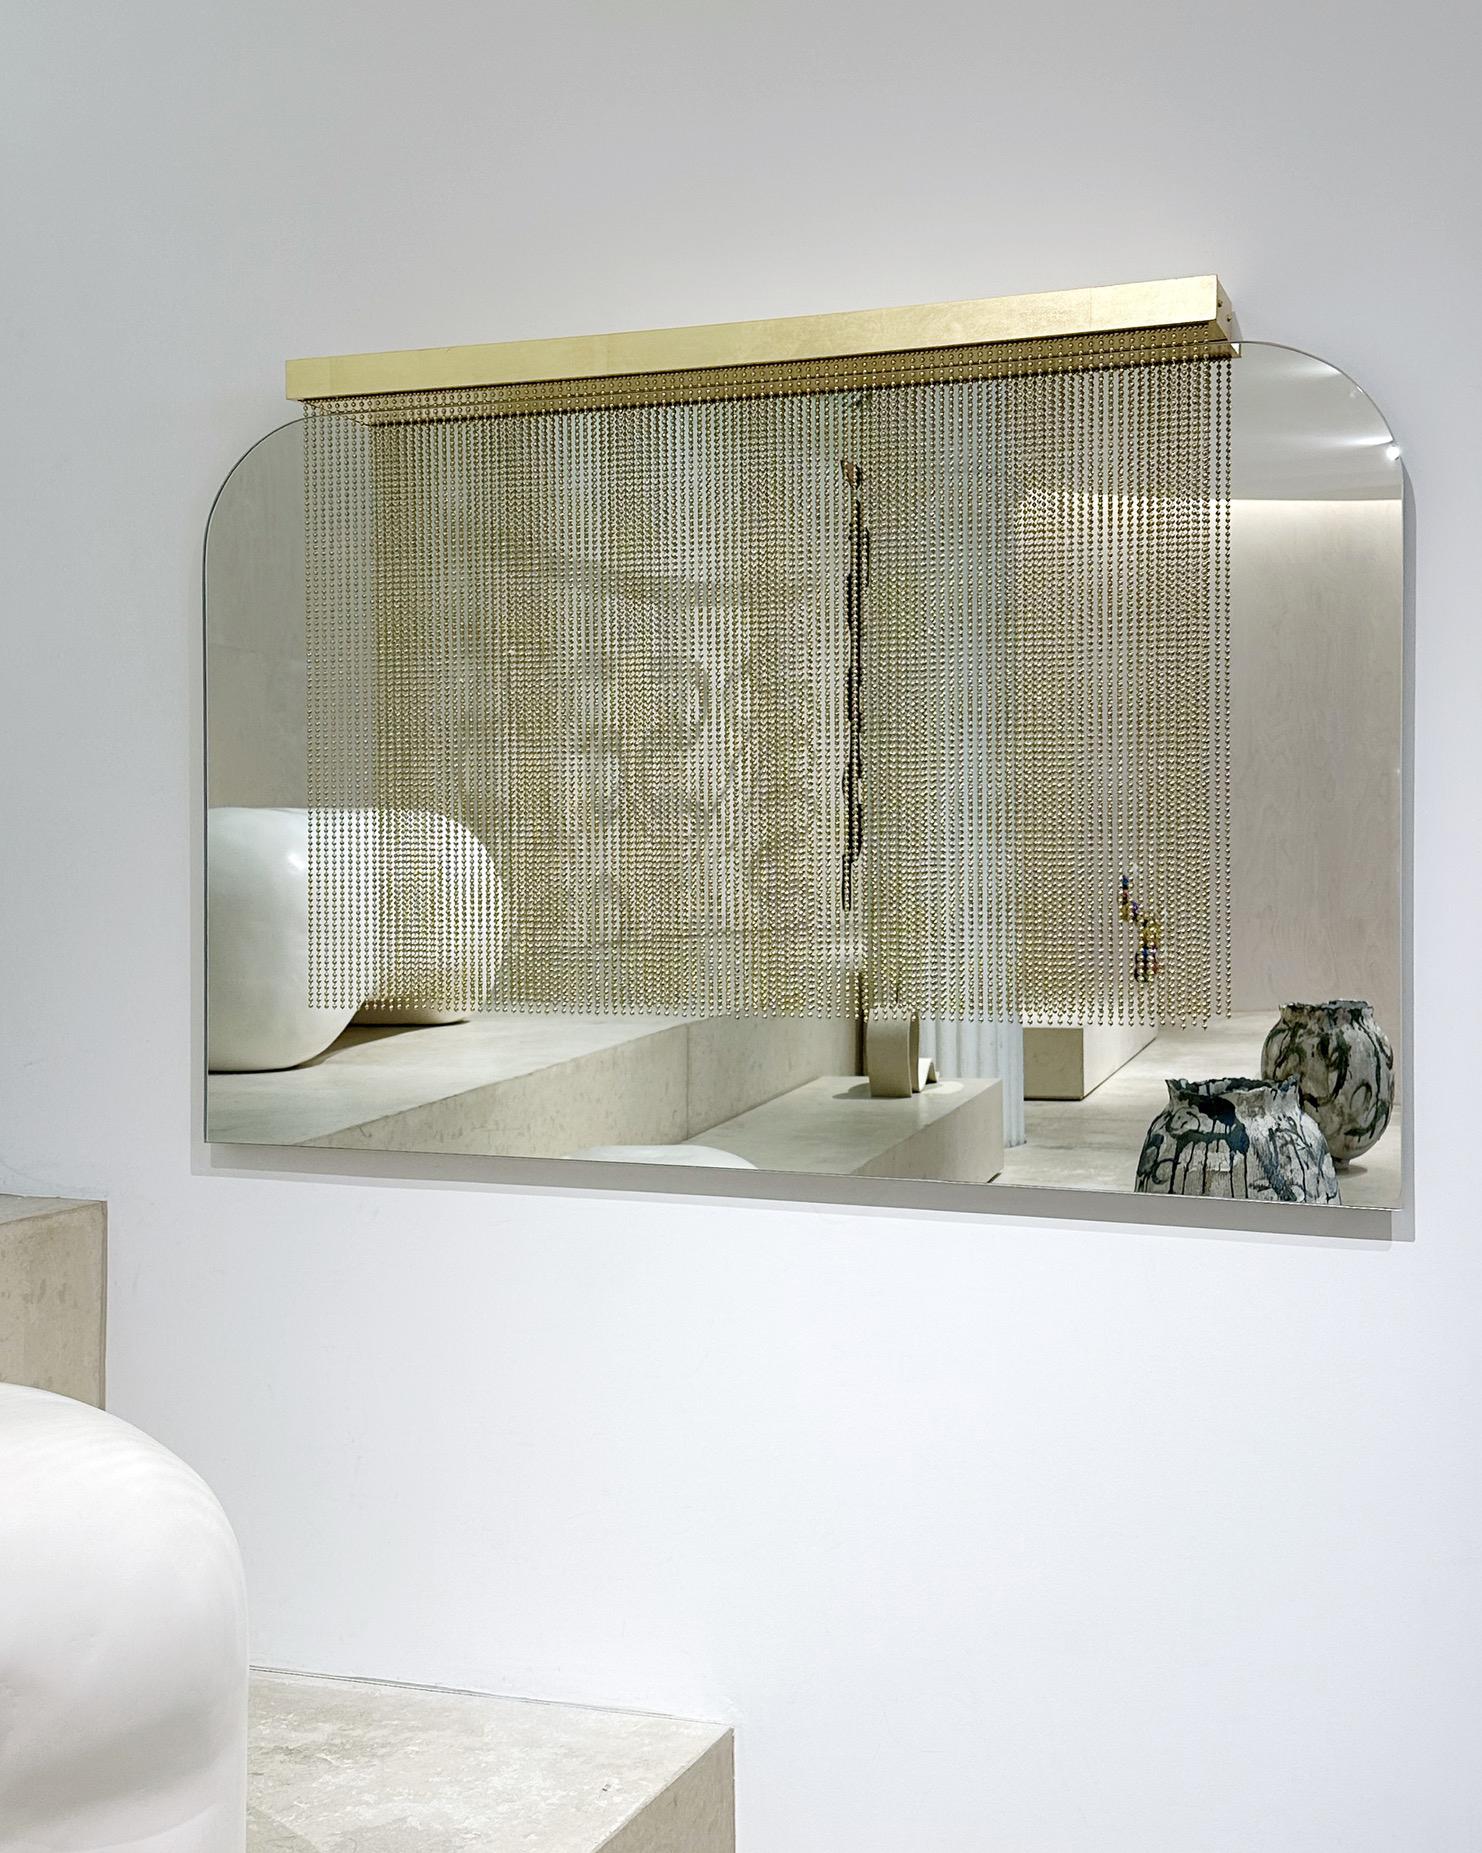 Purdah Large Mirror by Indo Made
Dimensions: D 10.2 x W 121.9 x H 76.2 cm.
Materials: Satin brass, mirrored glass and gold leaf.

Each piece is carefully handcrafted by our team using natural materials and traditional processes. Slight variations